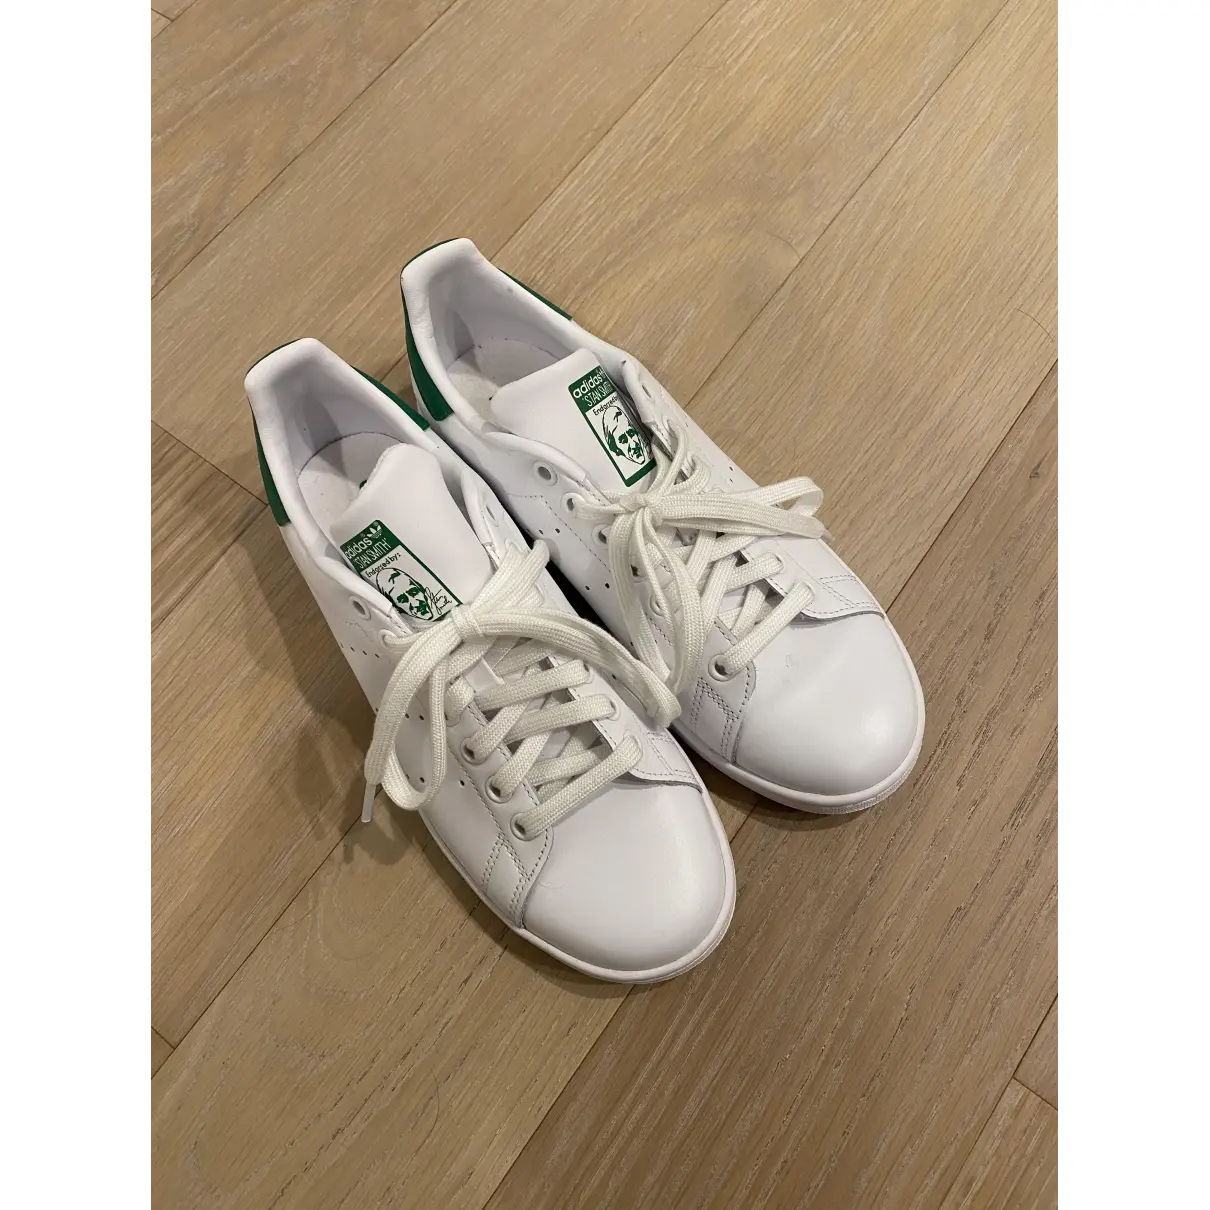 Buy Adidas Stan Smith leather trainers online